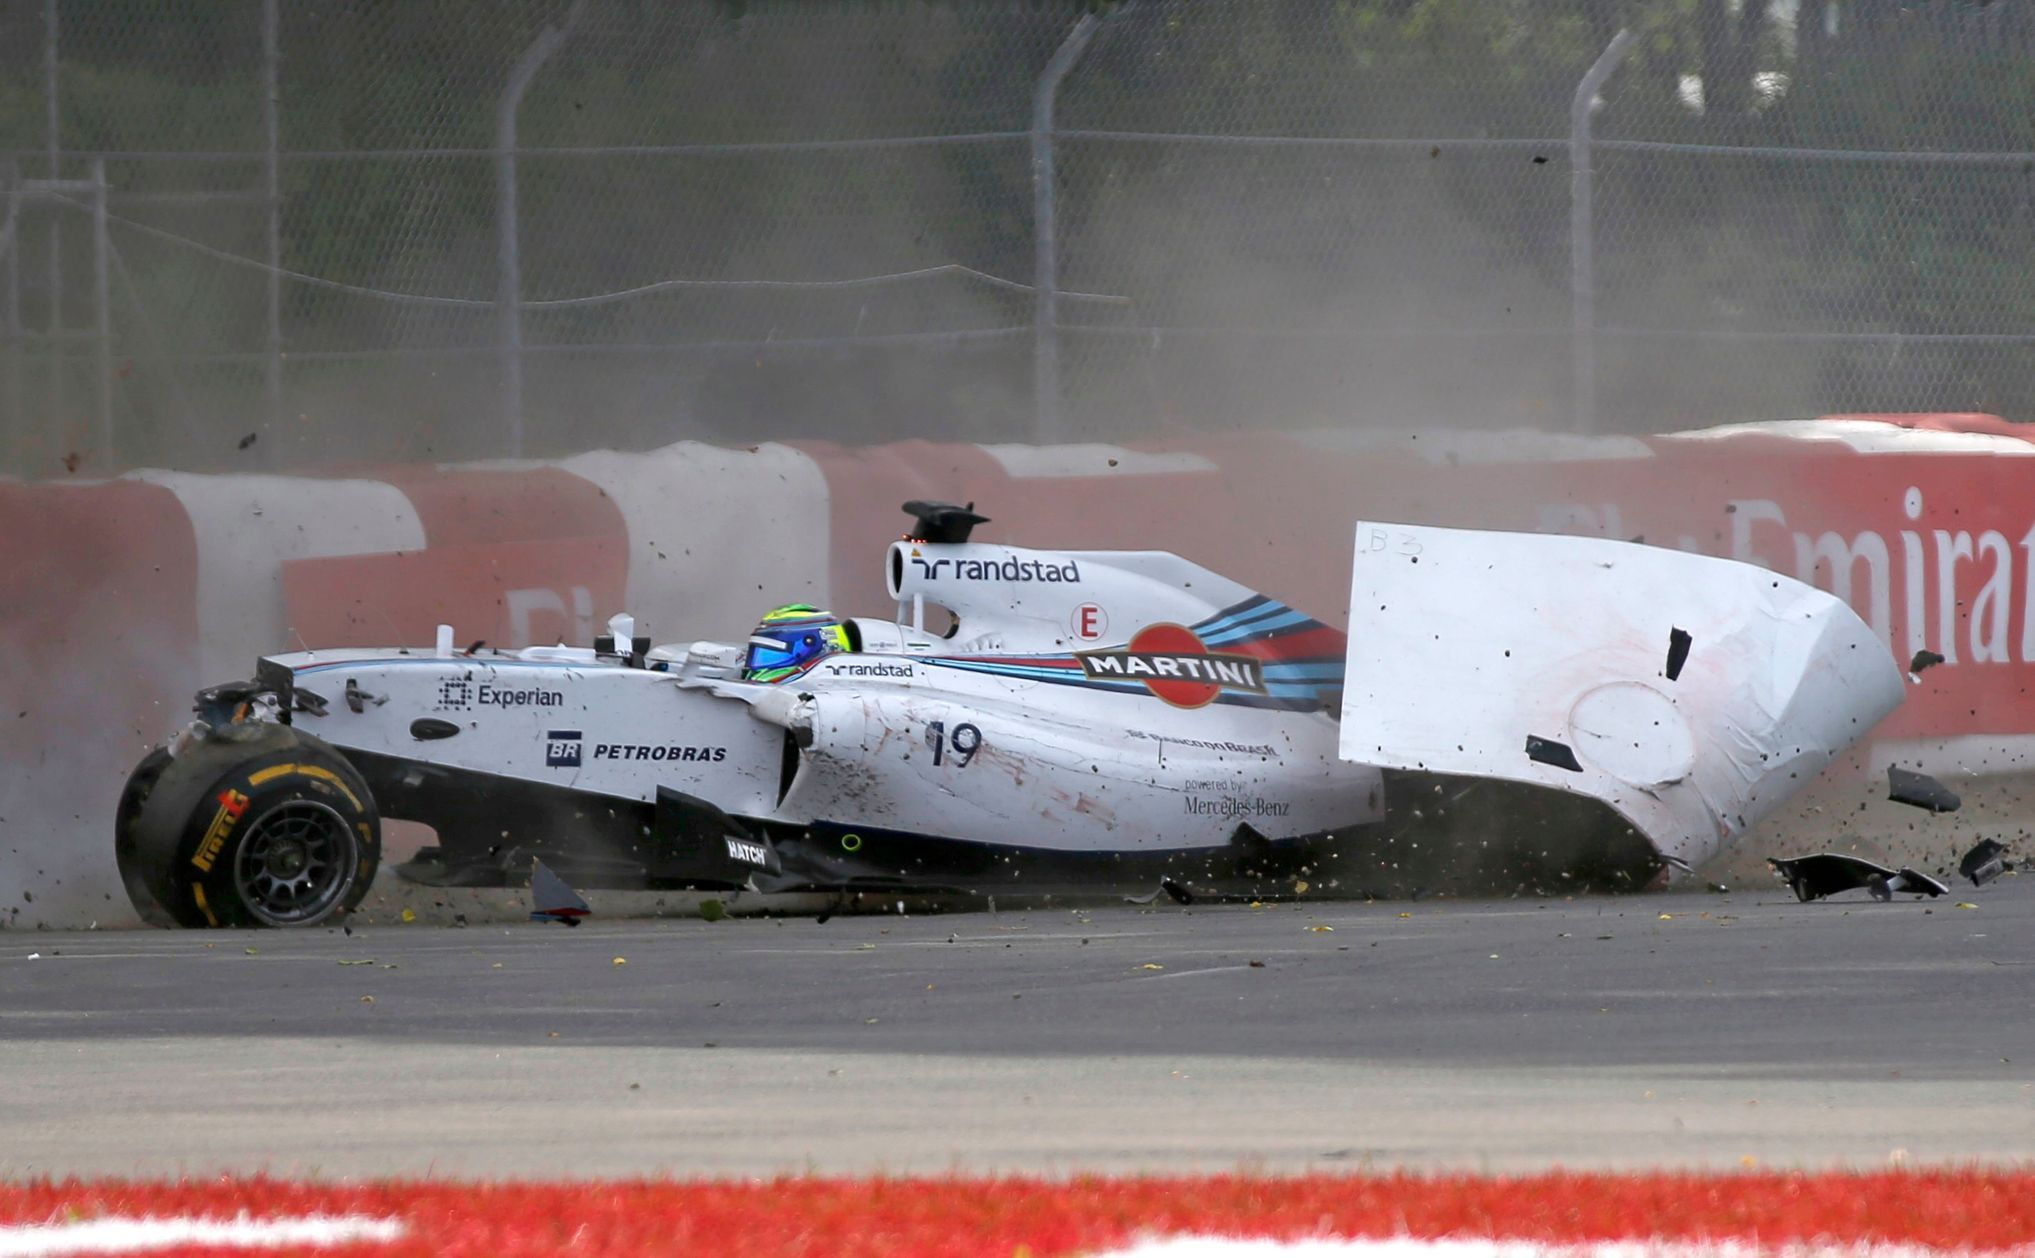 Williams Formula One driver Massa of Brazil crashes during the Canadian F1 Grand Prix at the Circuit Gilles Villeneuve in Montreal